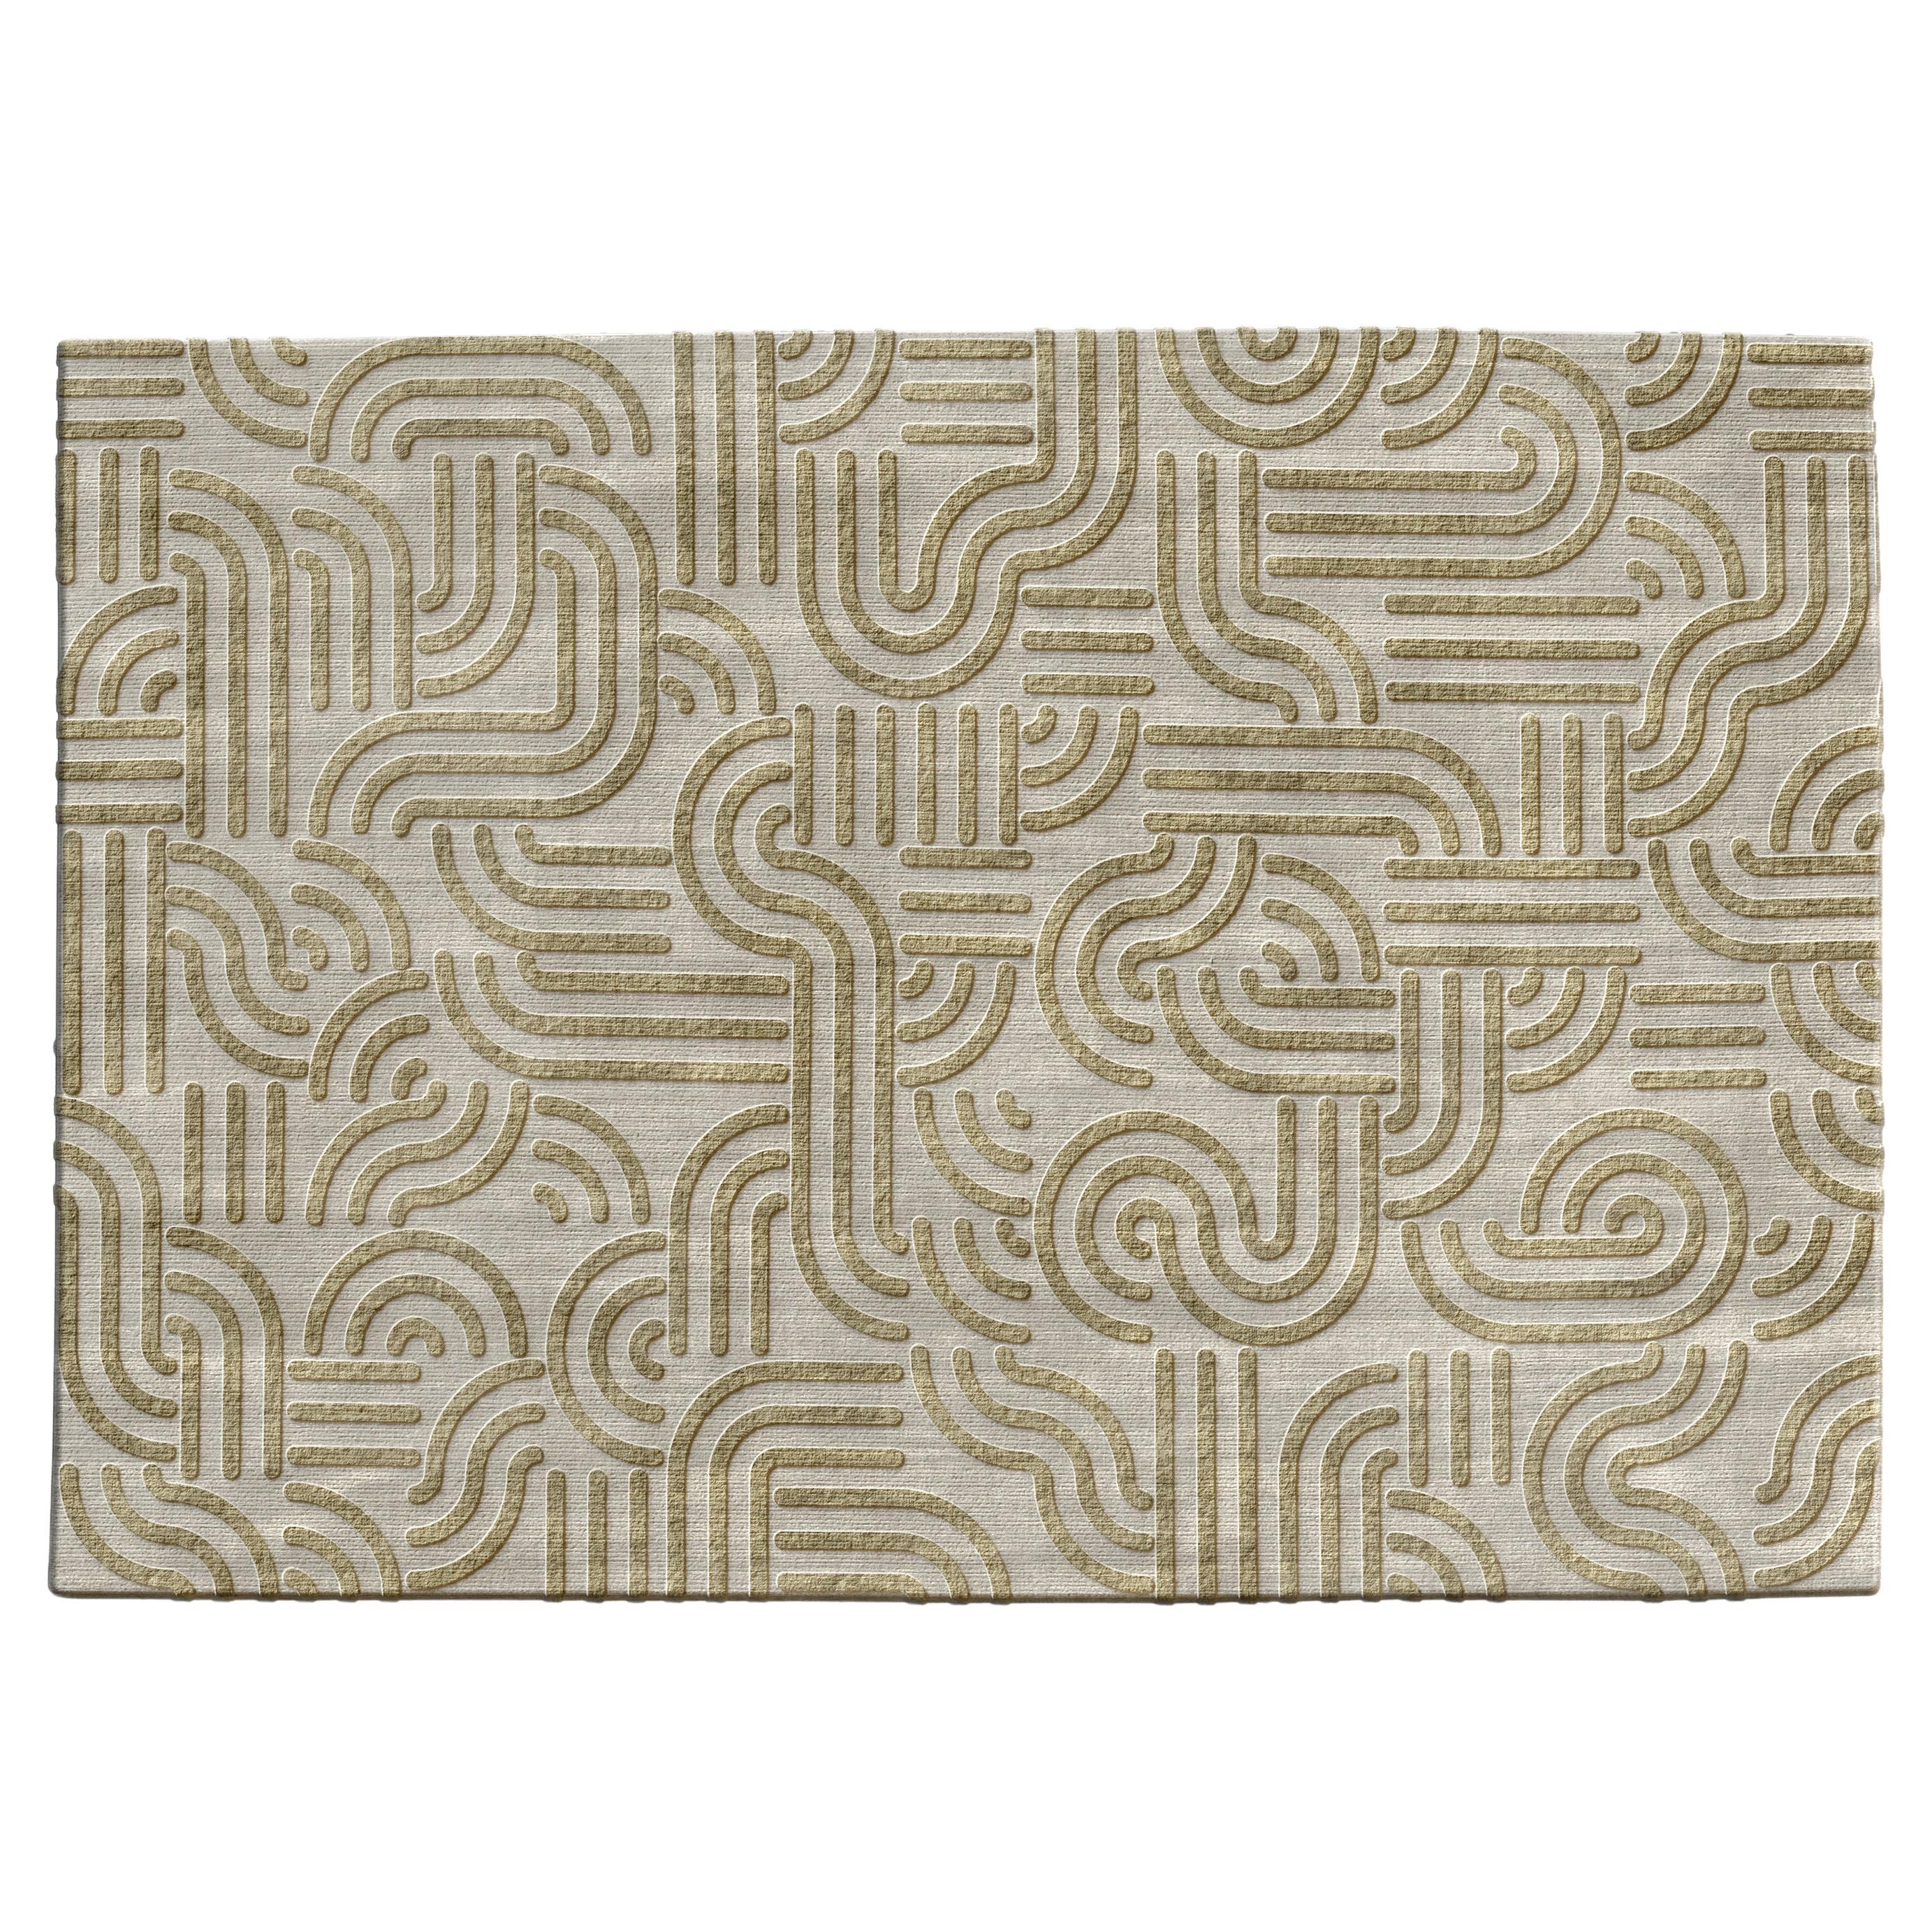 Amador Rug 01 - Limited Edition of 11 / Heirloom Hand Knotted Wool & Silk Yarn For Sale